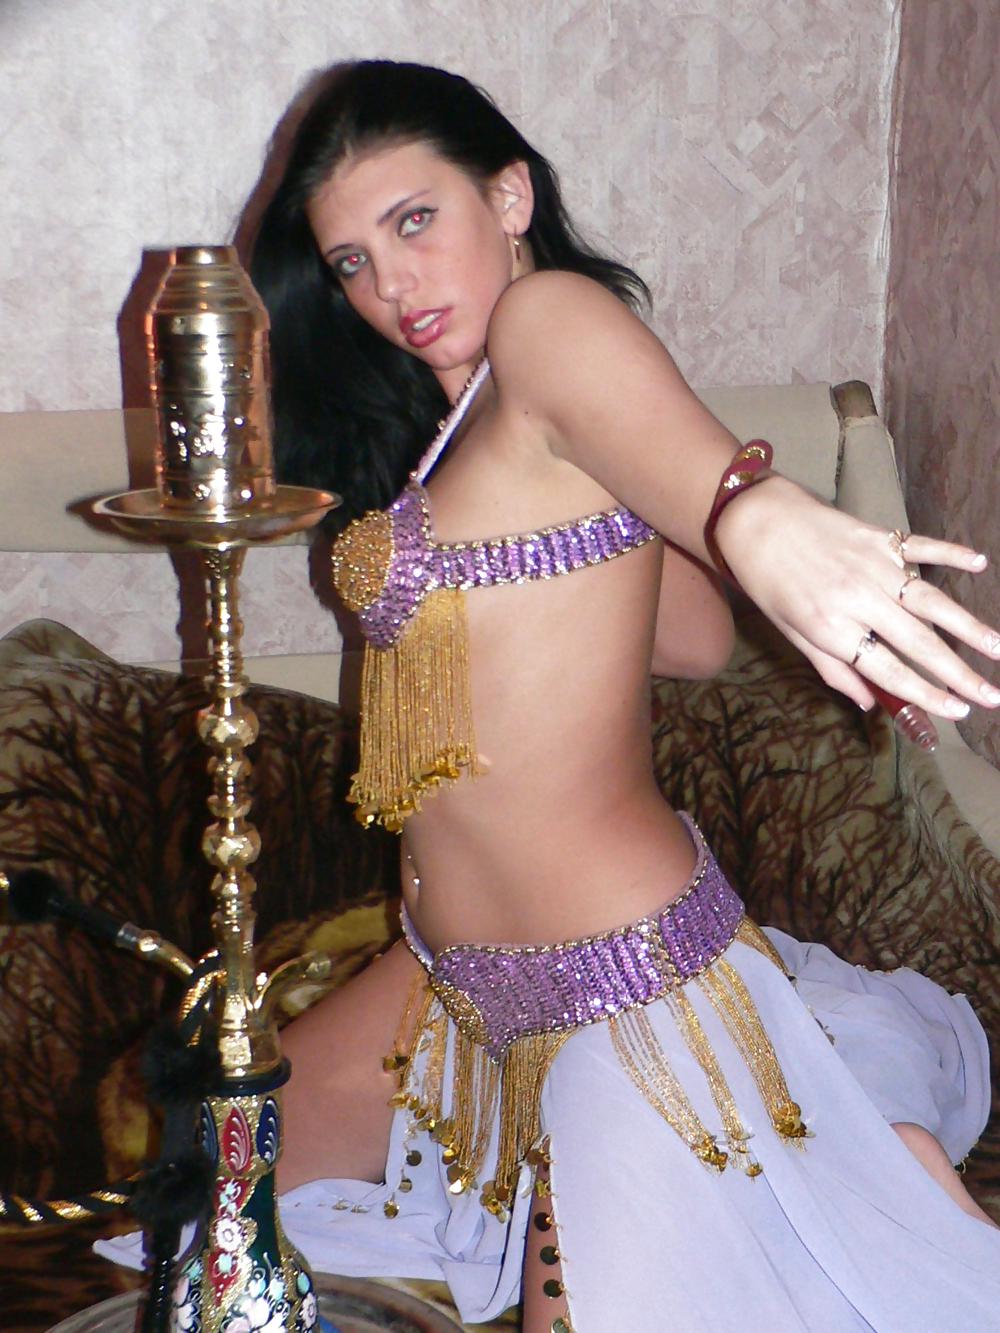 Free I LOVE BELLY DANCING photos